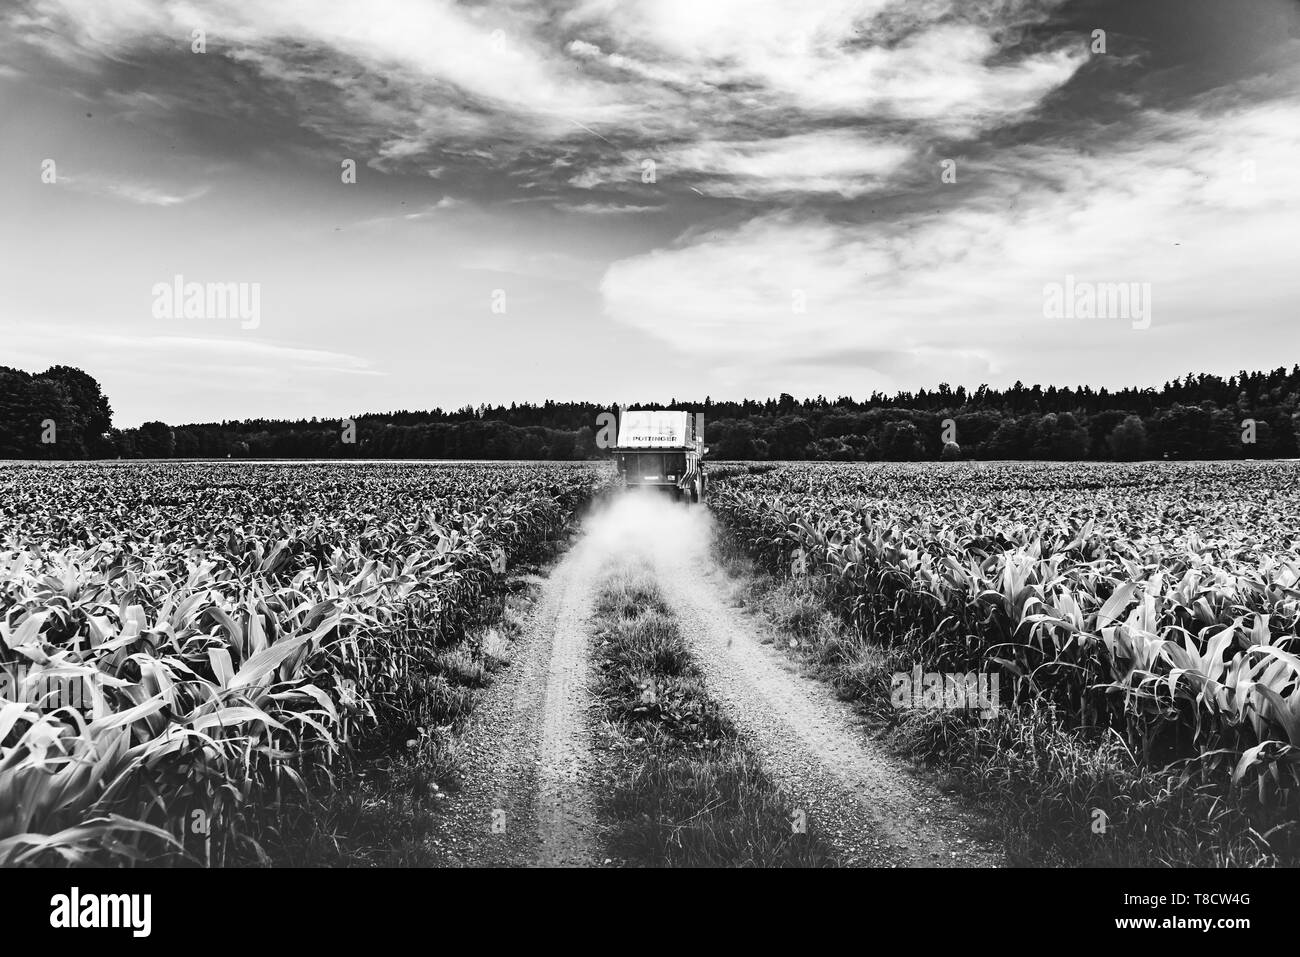 A tractor on a road between corn fields, Driving away, black and white photo Stock Photo